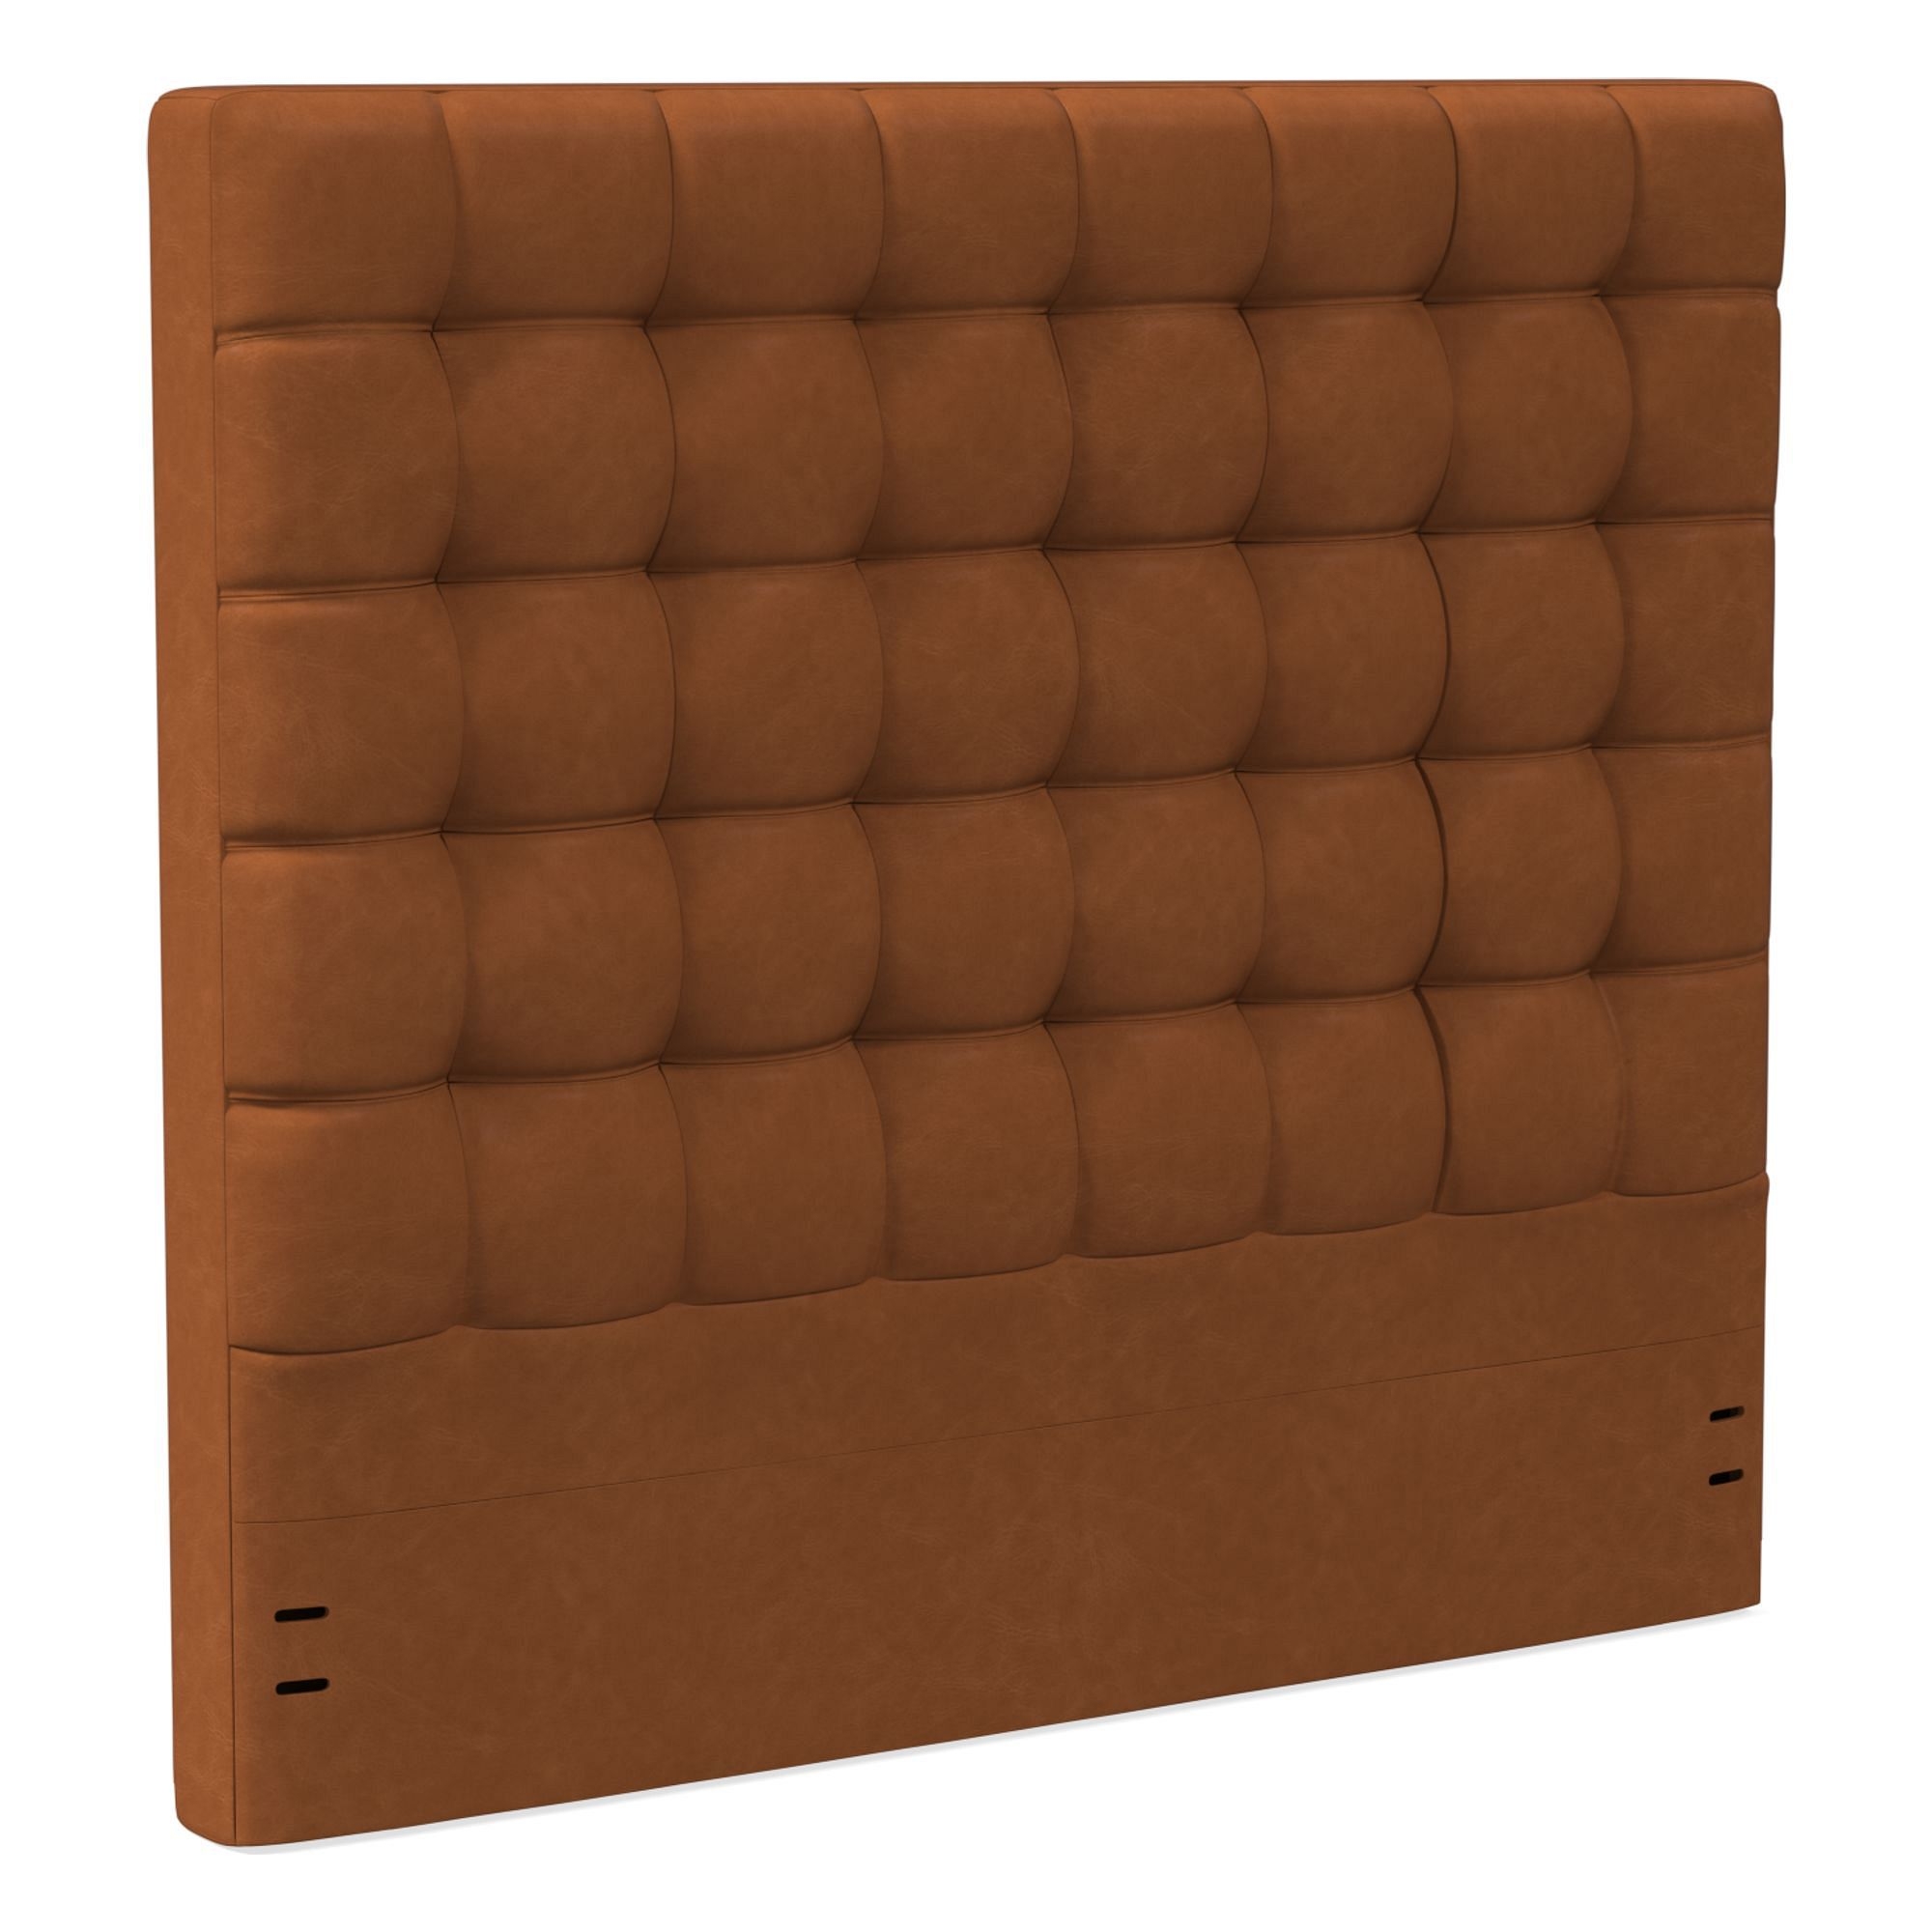 Grid Tufted Wall Mounted Headboard, Queen, Vegan Leather Saddle, Saddle - Image 2